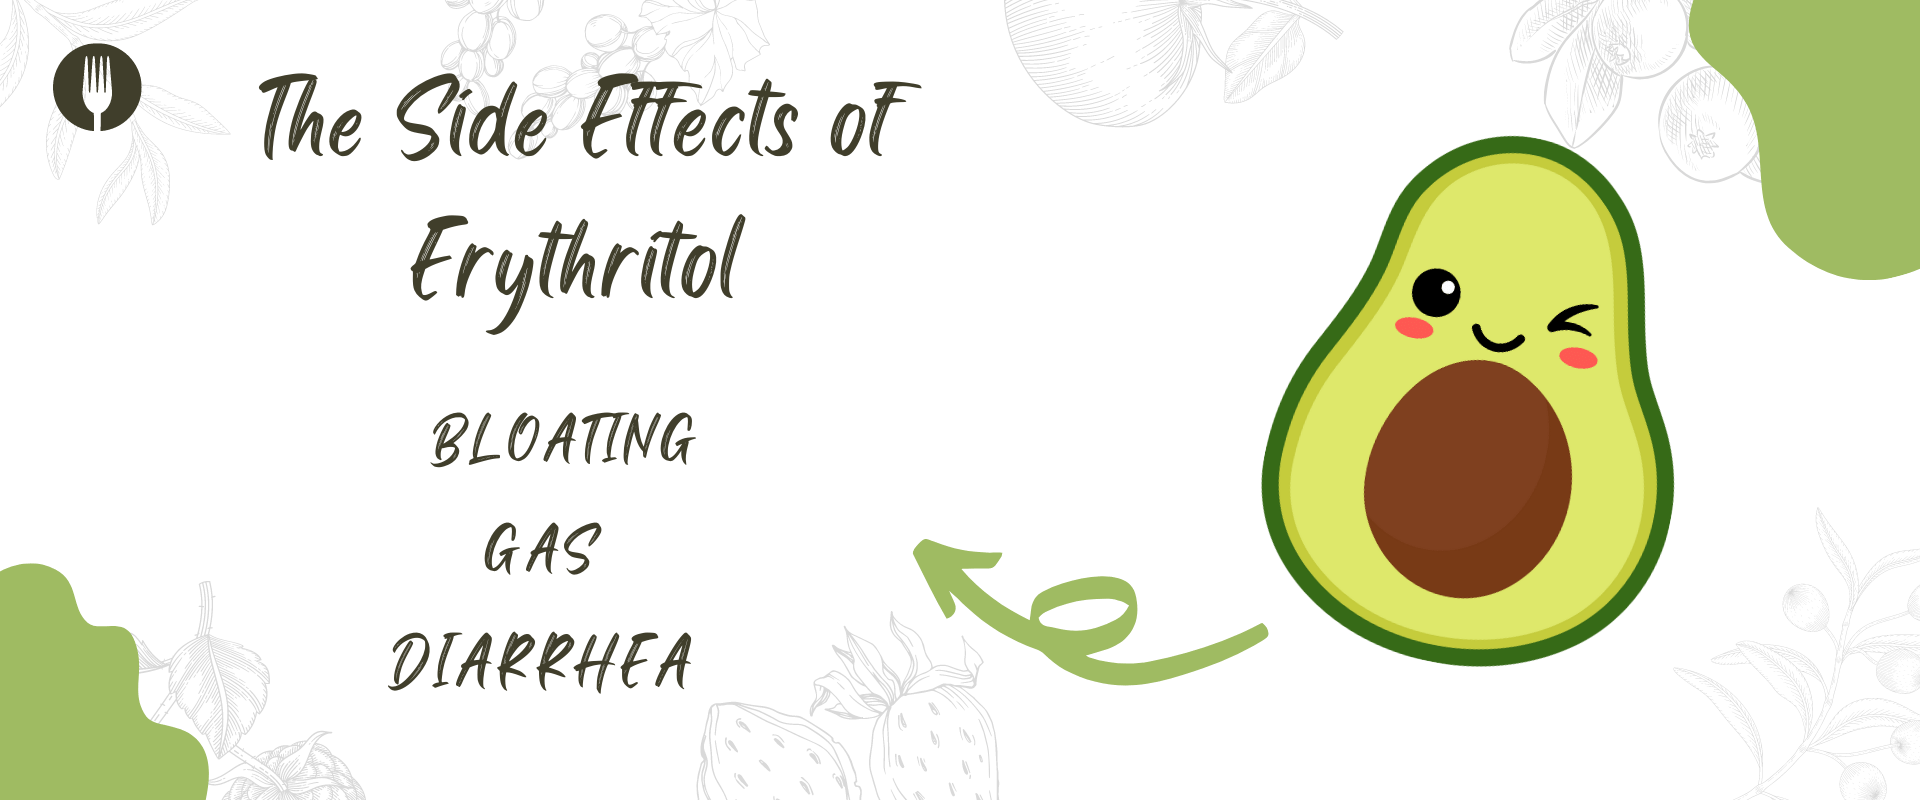 Erythritol Side Effects